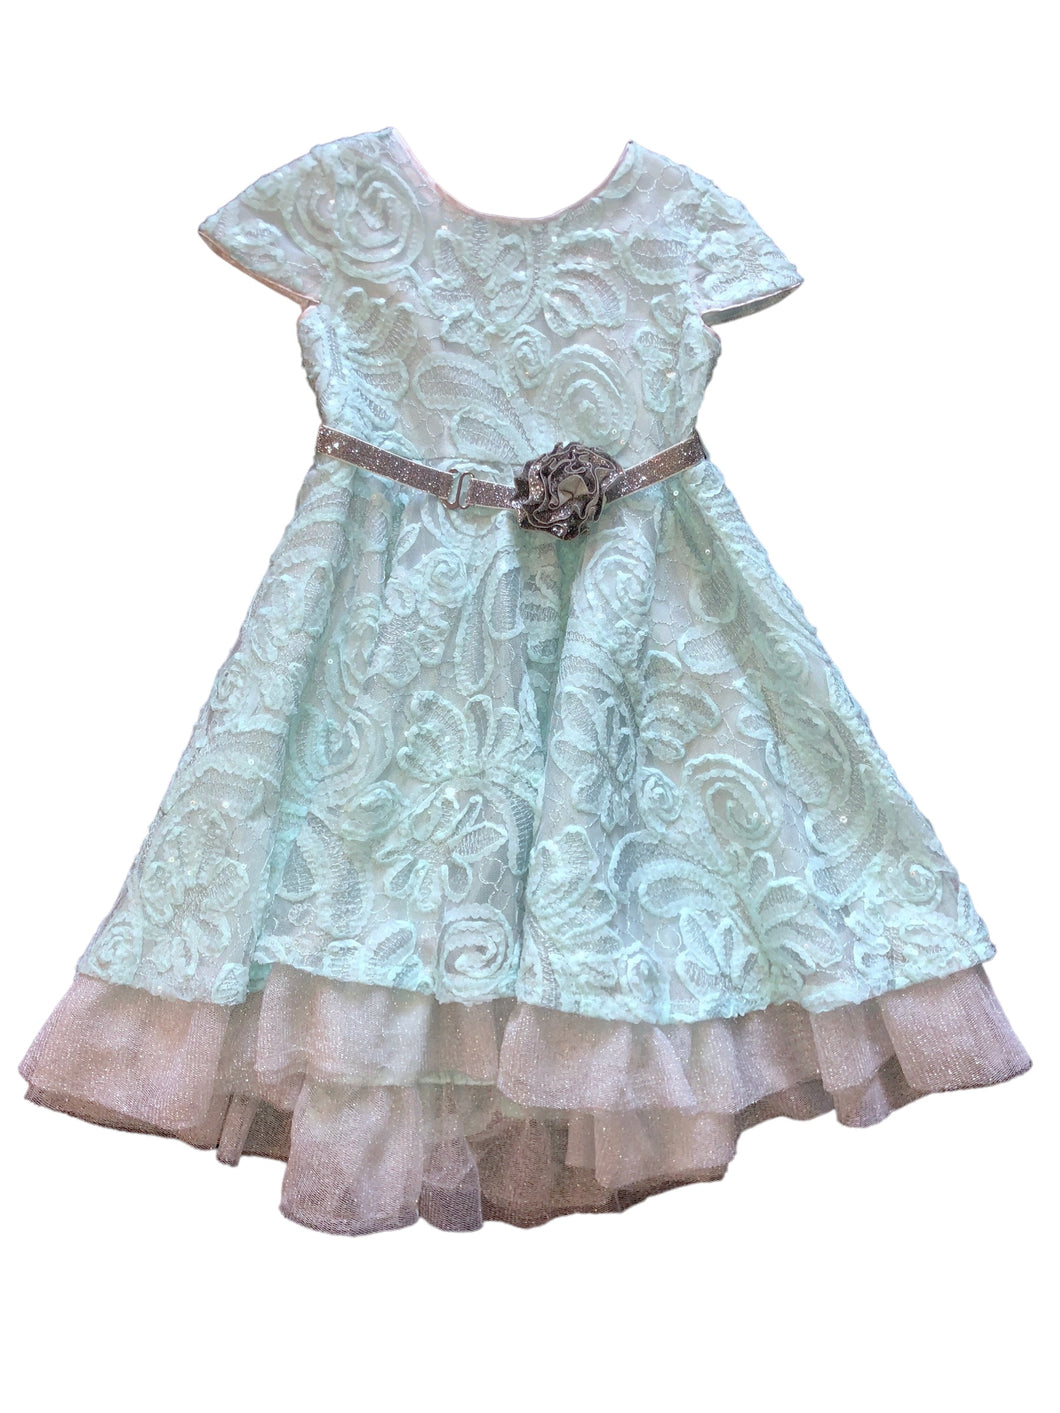 Purrfect girls layered lace special occasion party dress 4